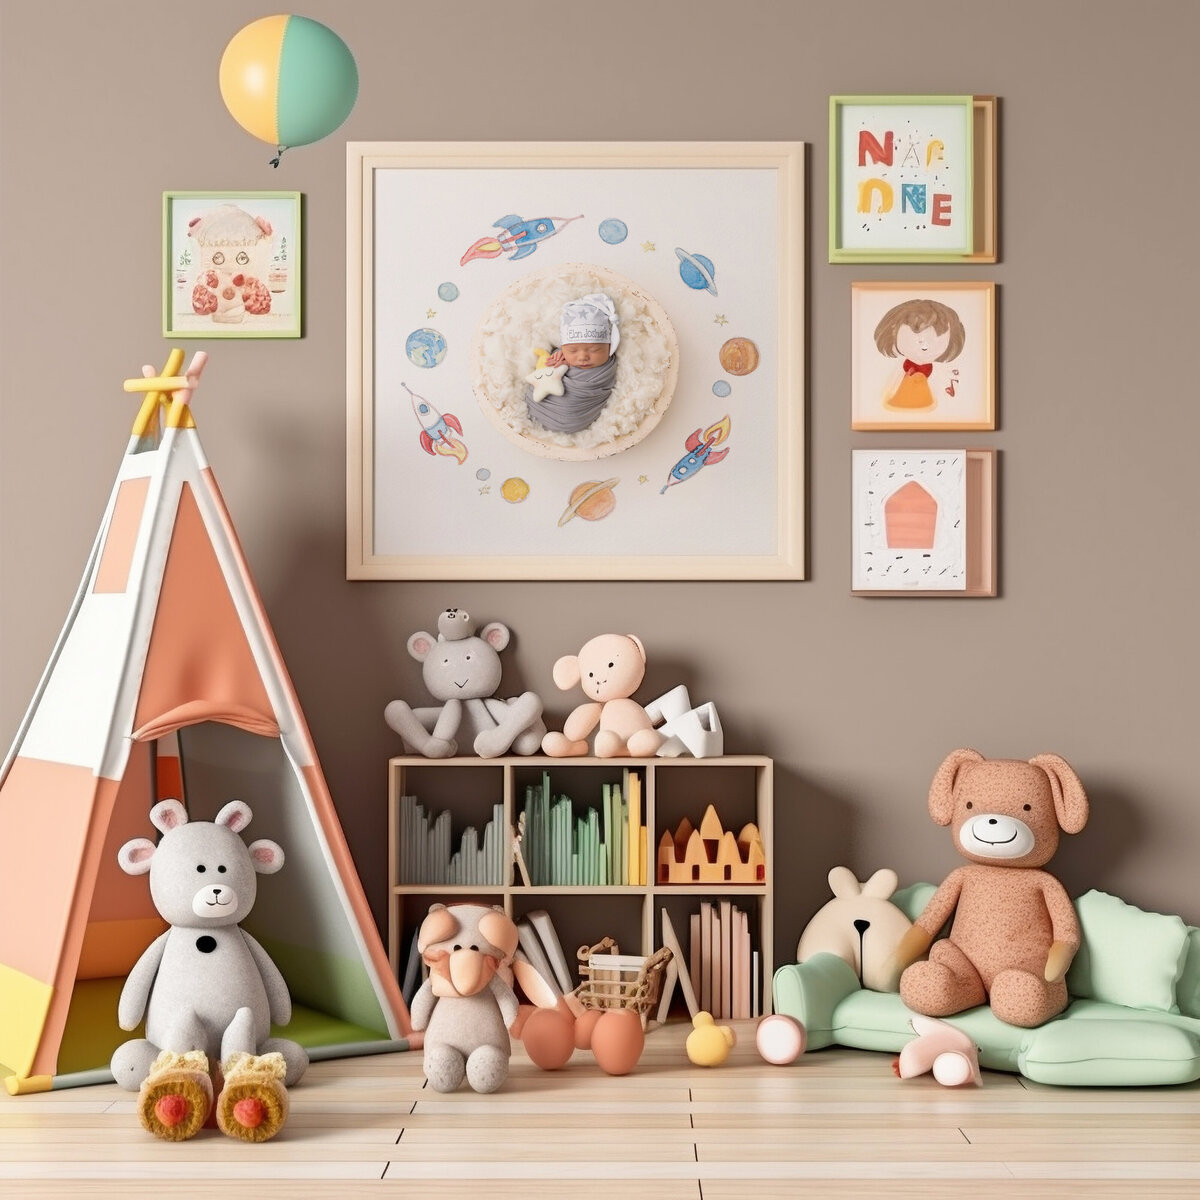 A fine art photography image of a newborn baby sleeping in a swaddle hangs on a wall in a nursery filled with toys